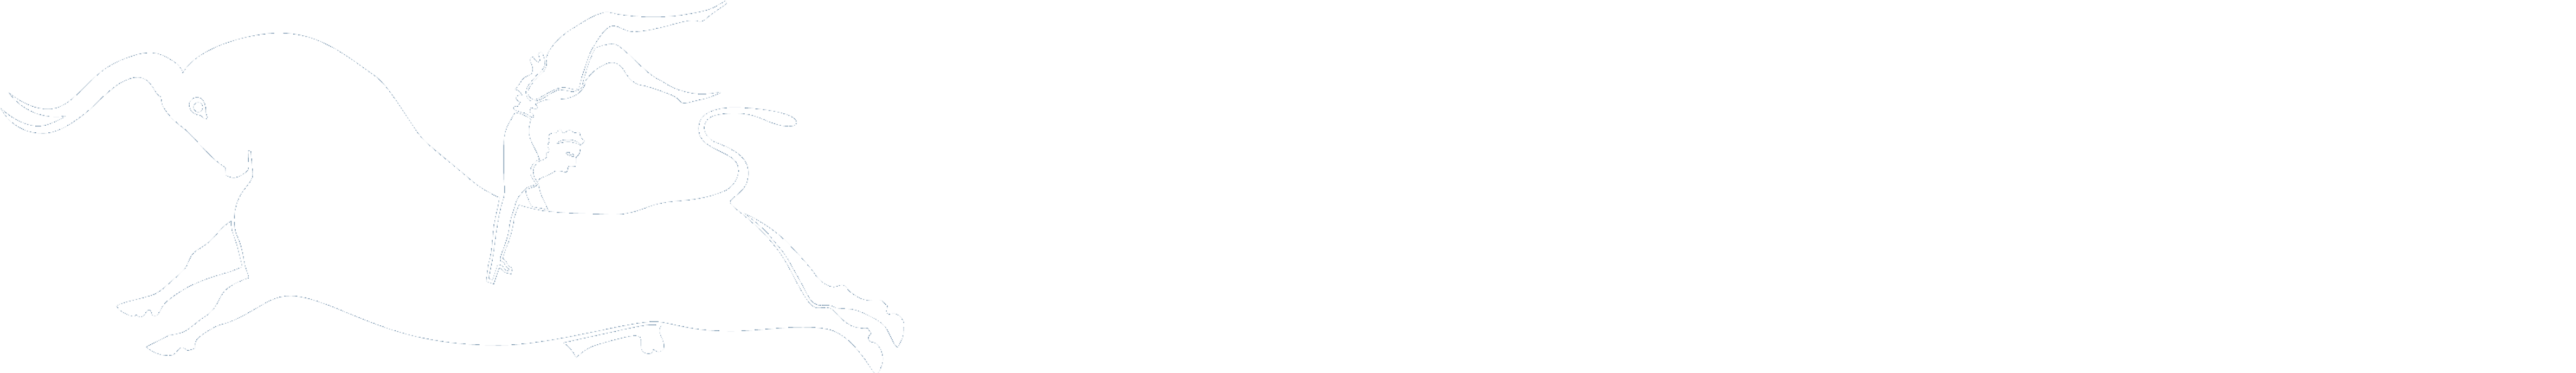 XIII International Conference on New Frontiers in Physics 2024